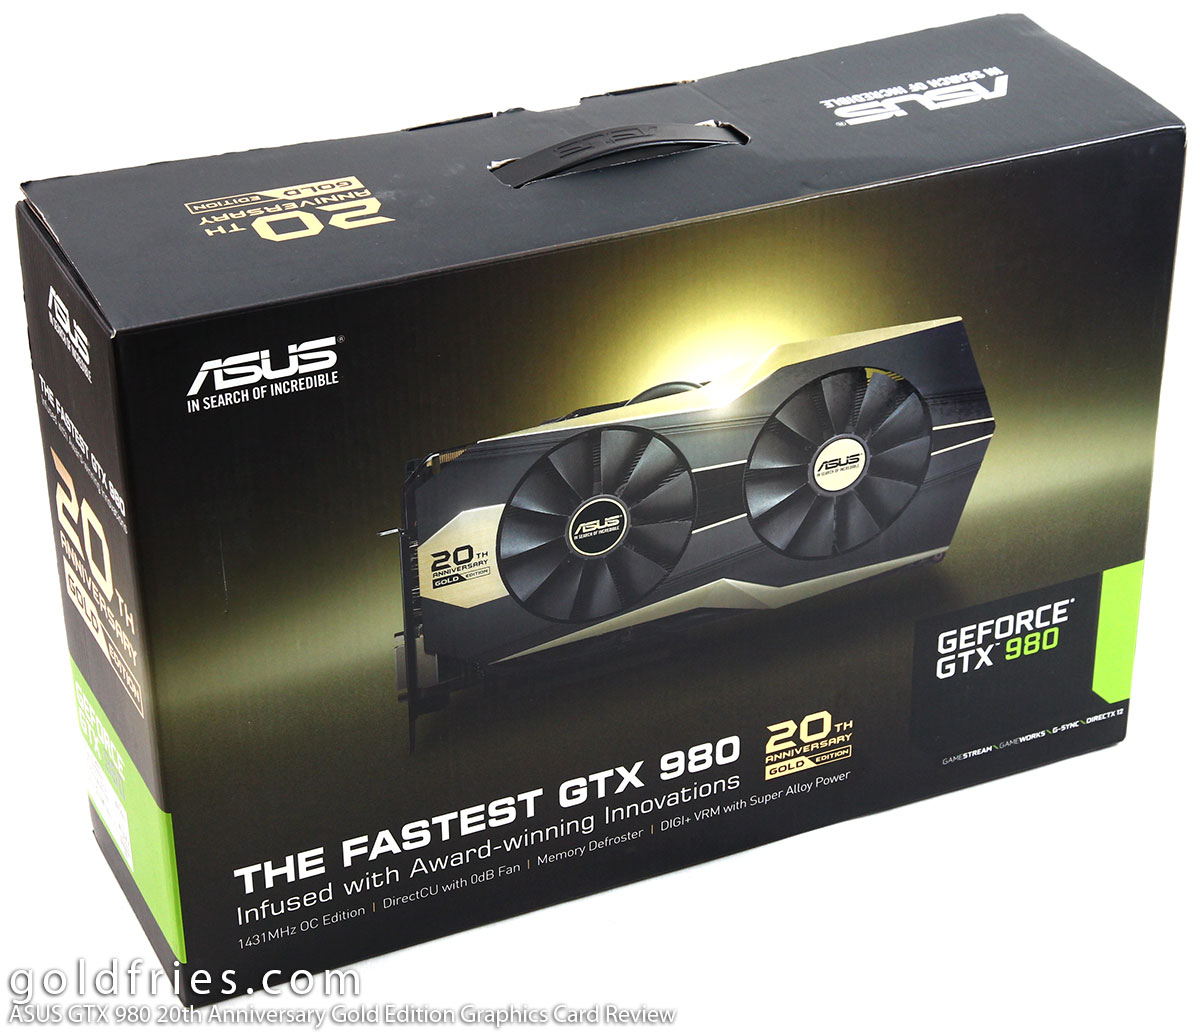 ASUS GTX 980 20th Anniversary Gold Edition Graphics Card Review